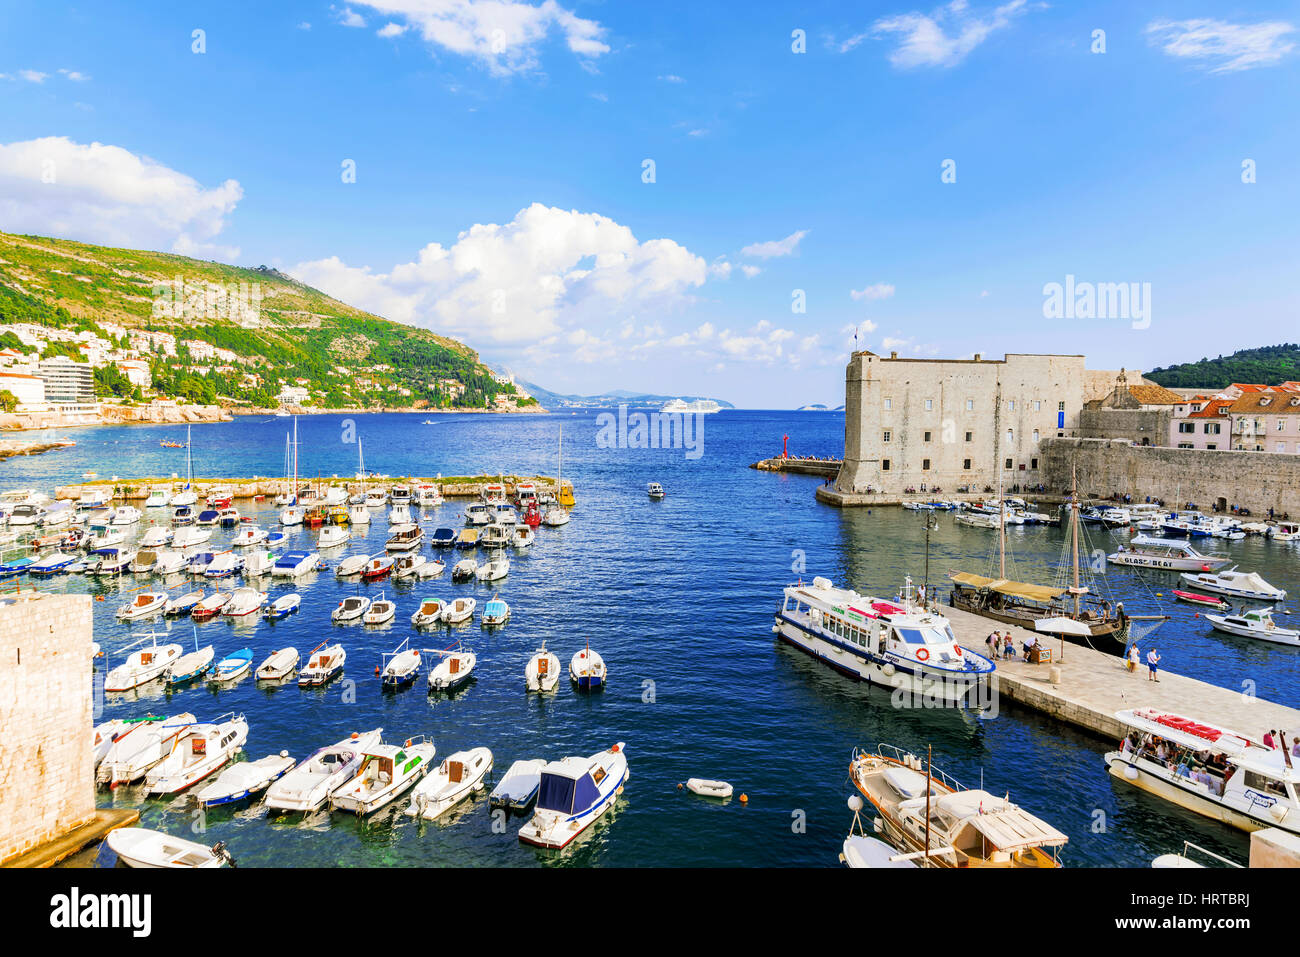 DUBROVNIK, CROATIA - SEPTEMBER 22: This is a view of the Docks in Dubrovnik outside the castle walls on September 22, 2016 in Dubrovnik Stock Photo